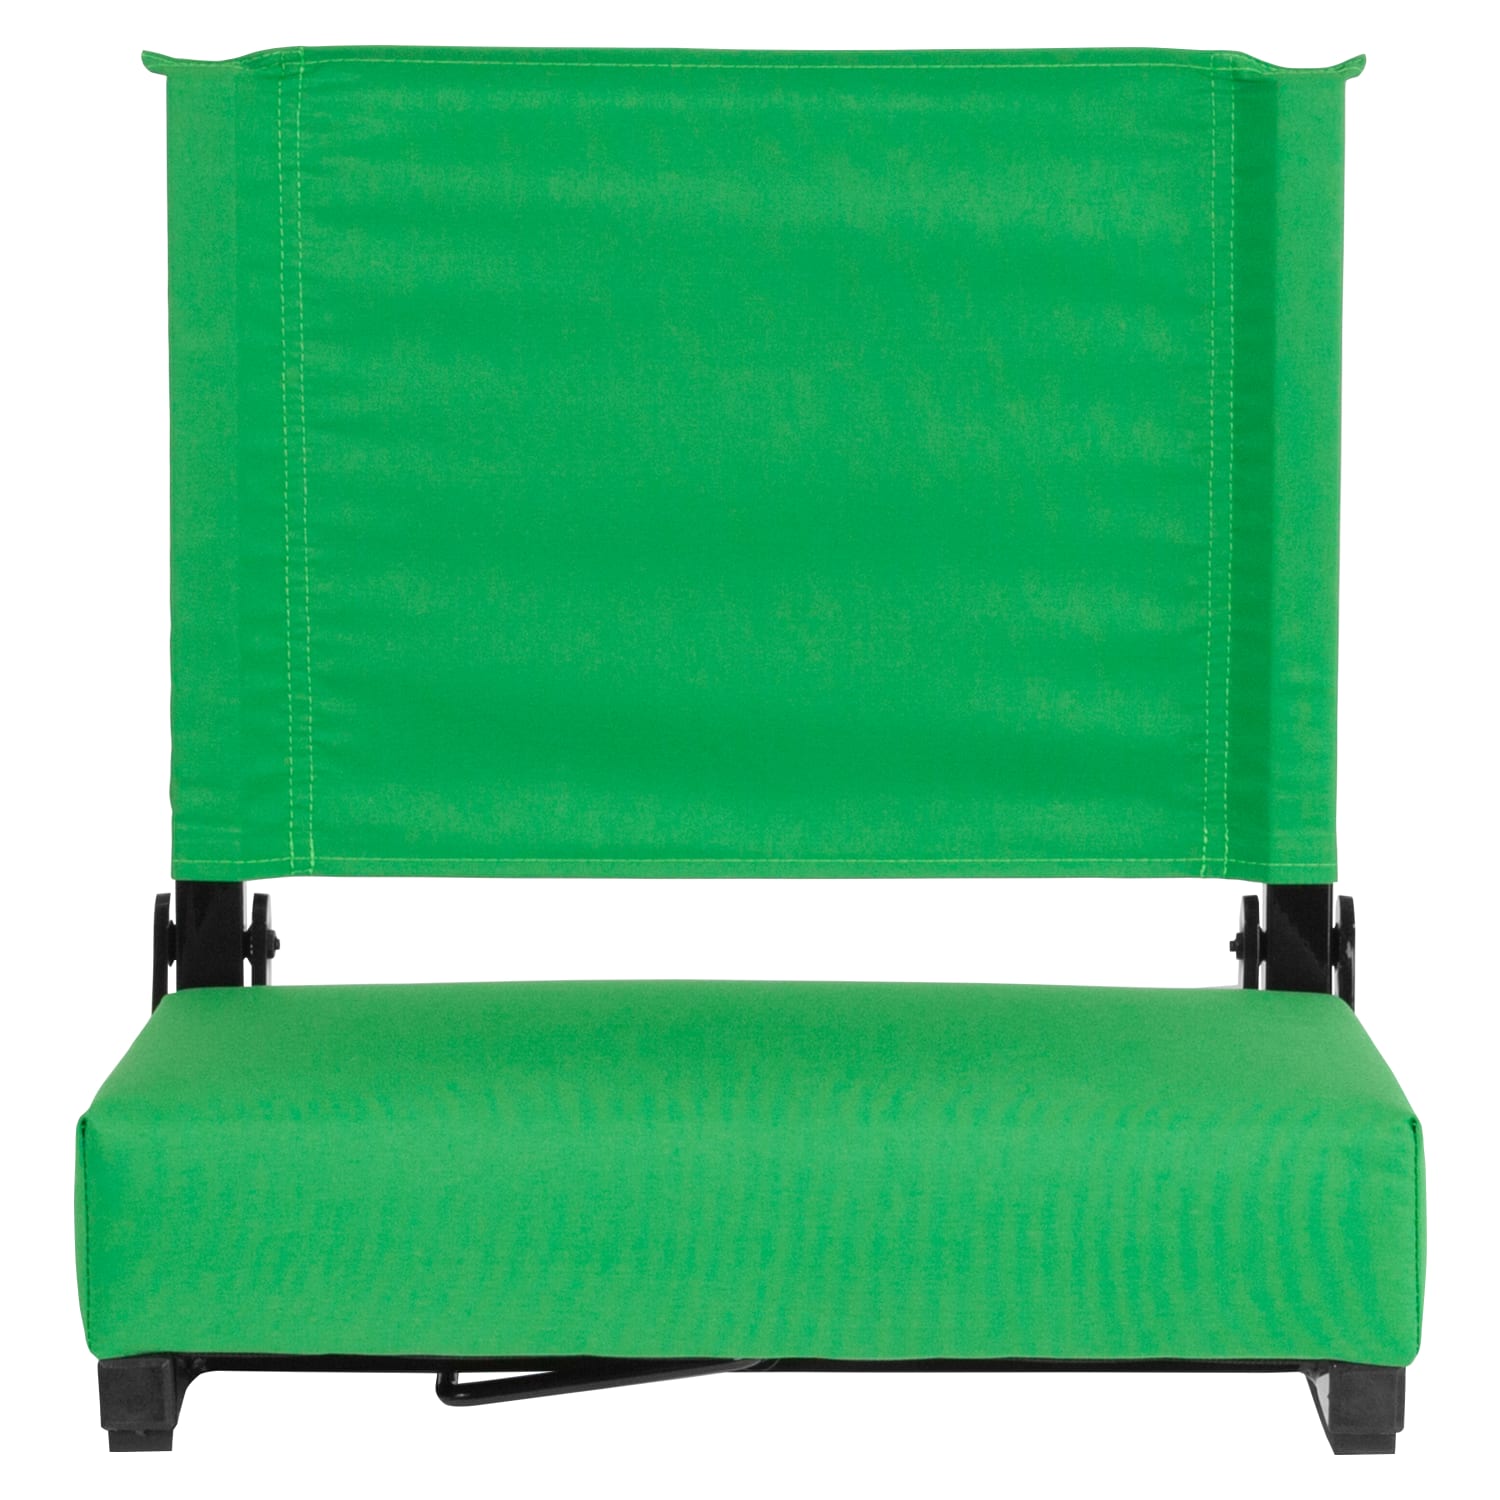 Grandstand Comfort Seats by Flash - Lightweight Stadium Chair with Handle & Ultra-Padded Seat, Bright Green